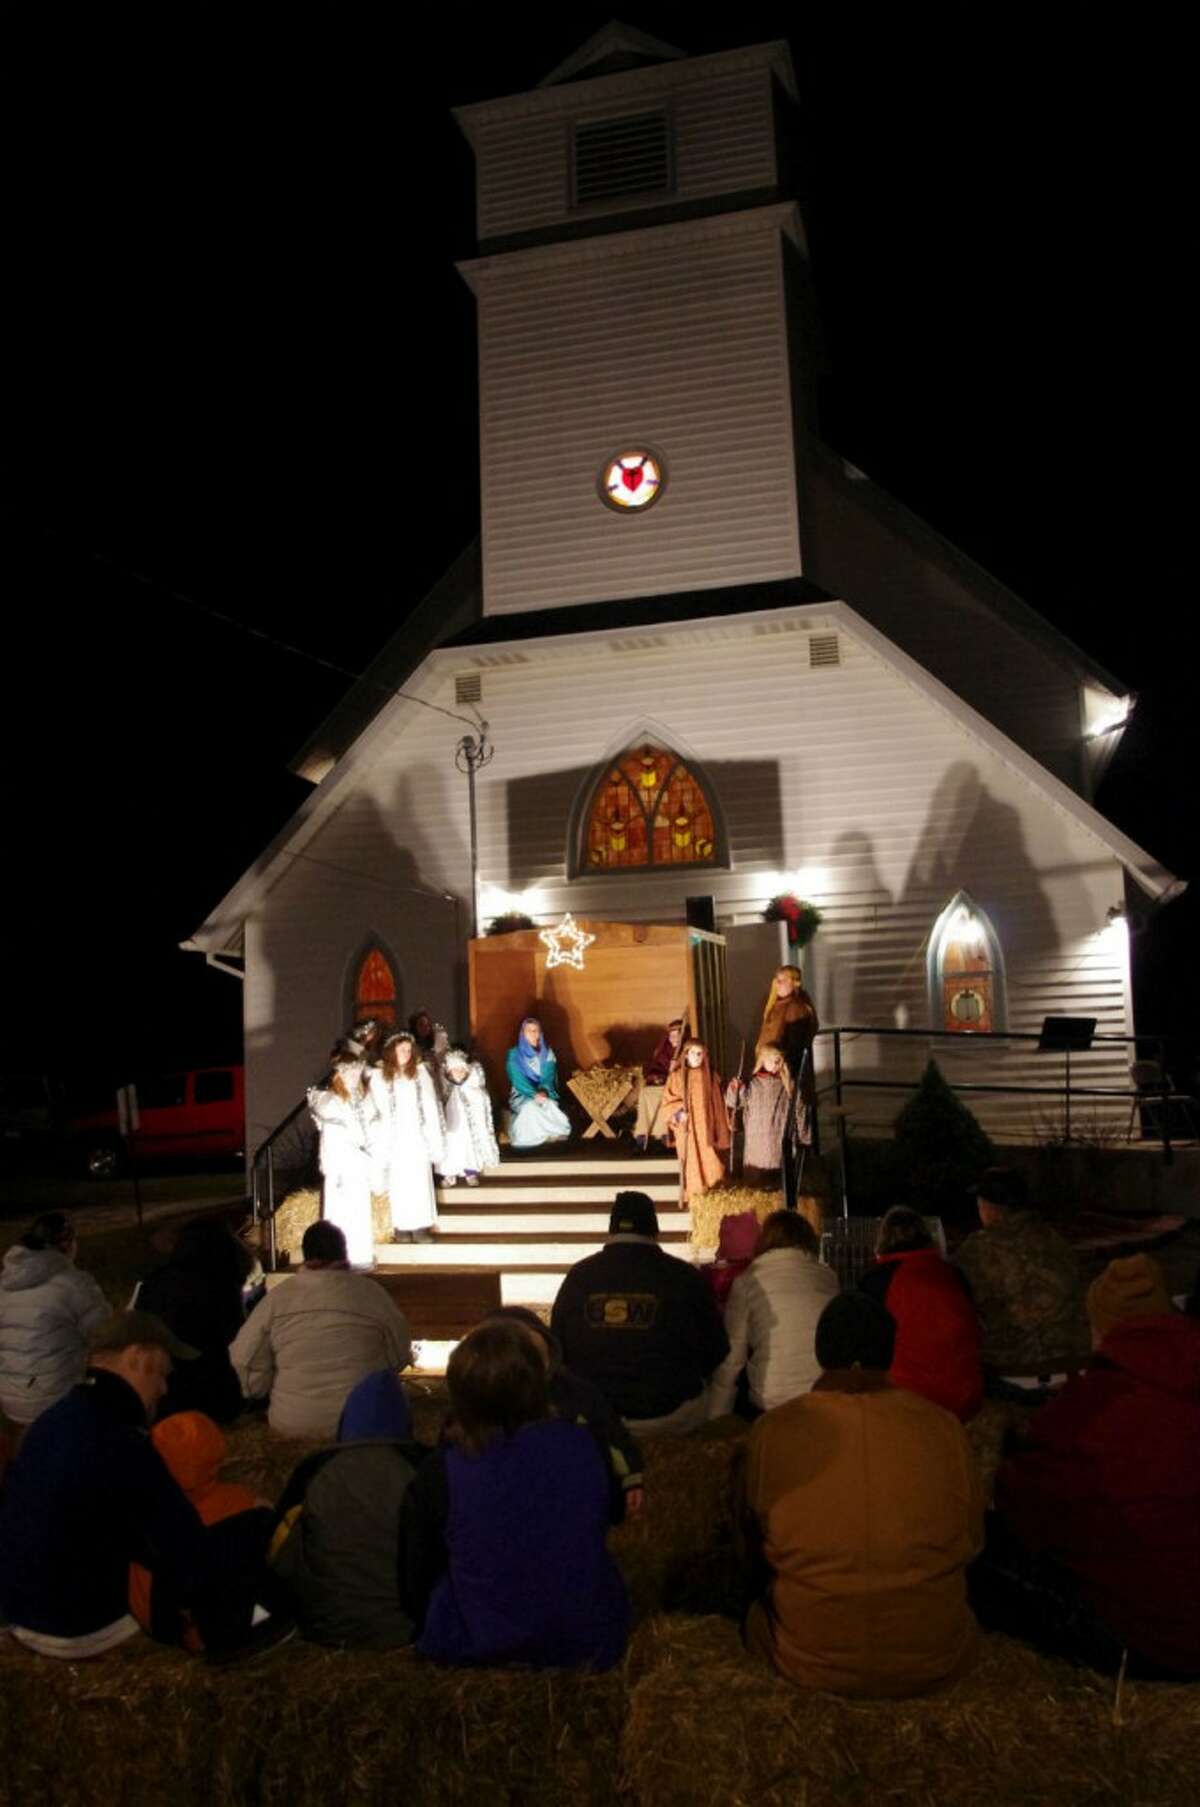 The congregation sat on bales of straw to watch the 23rd annual Norwalk Lutheran Chruch live nativity. (Dave Yarnell/News Advocate)